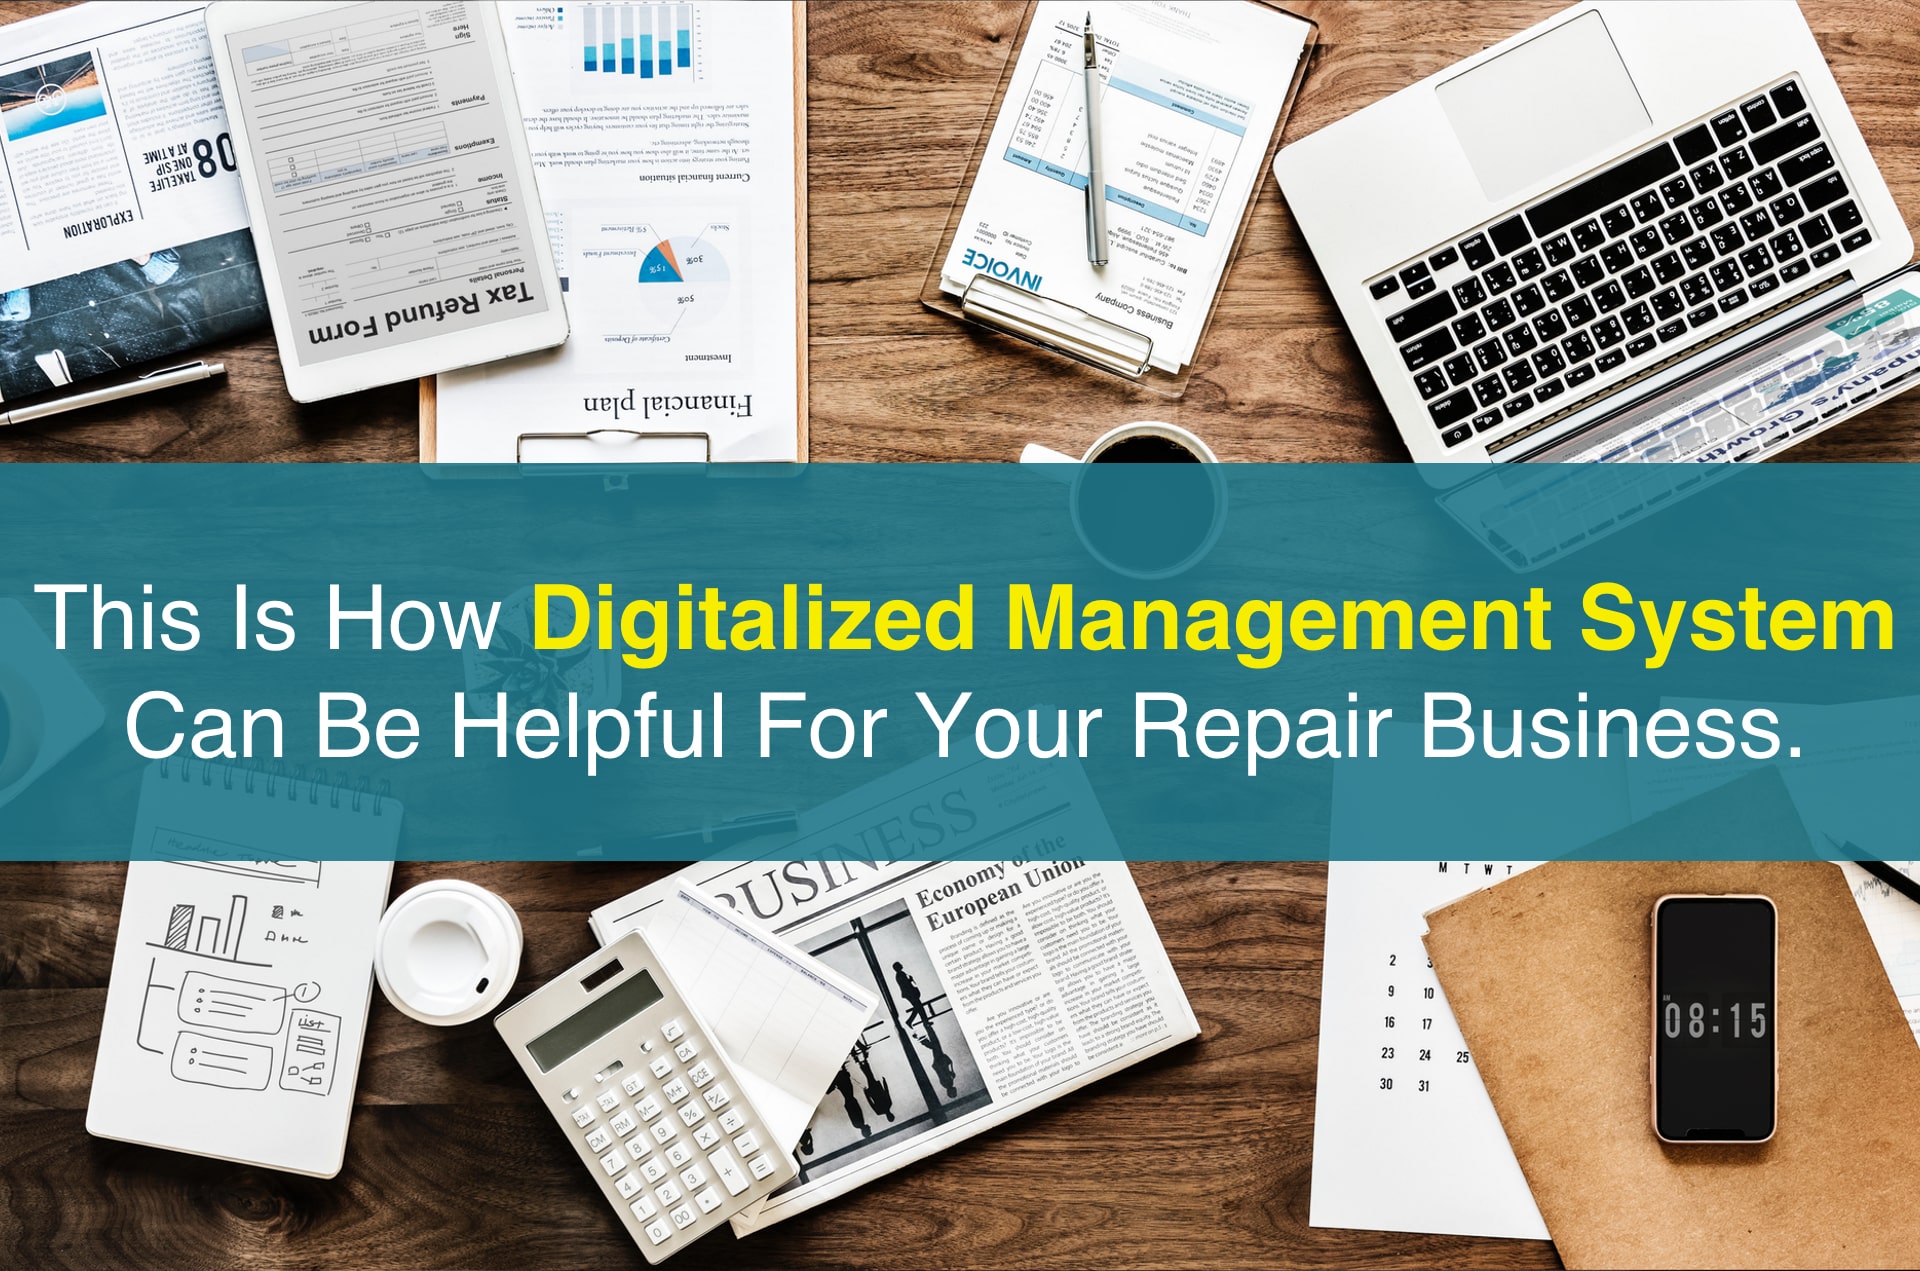 How is digitalized management system better than traditional ones